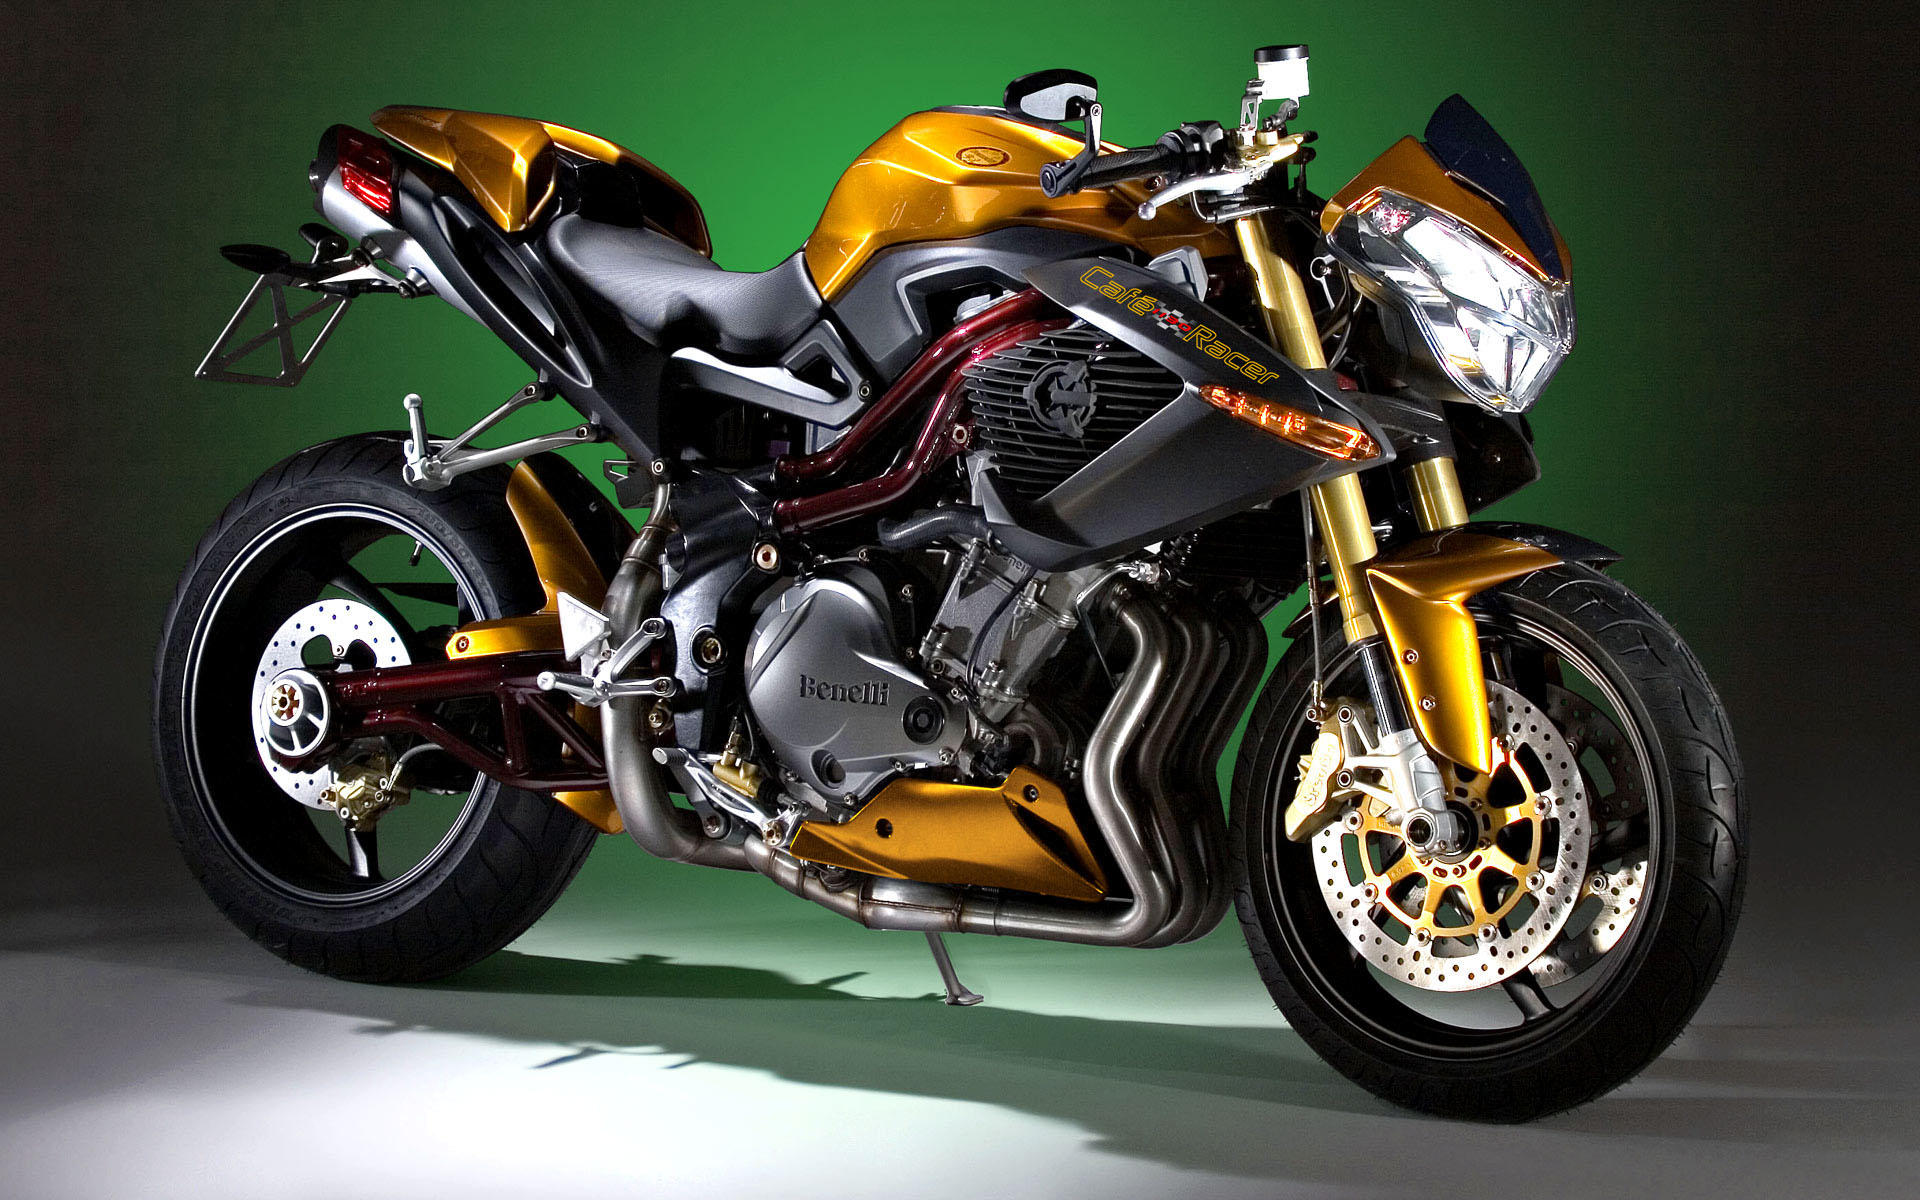 Bikes Super High Quality Desktop Picture Benelli   Free high quality